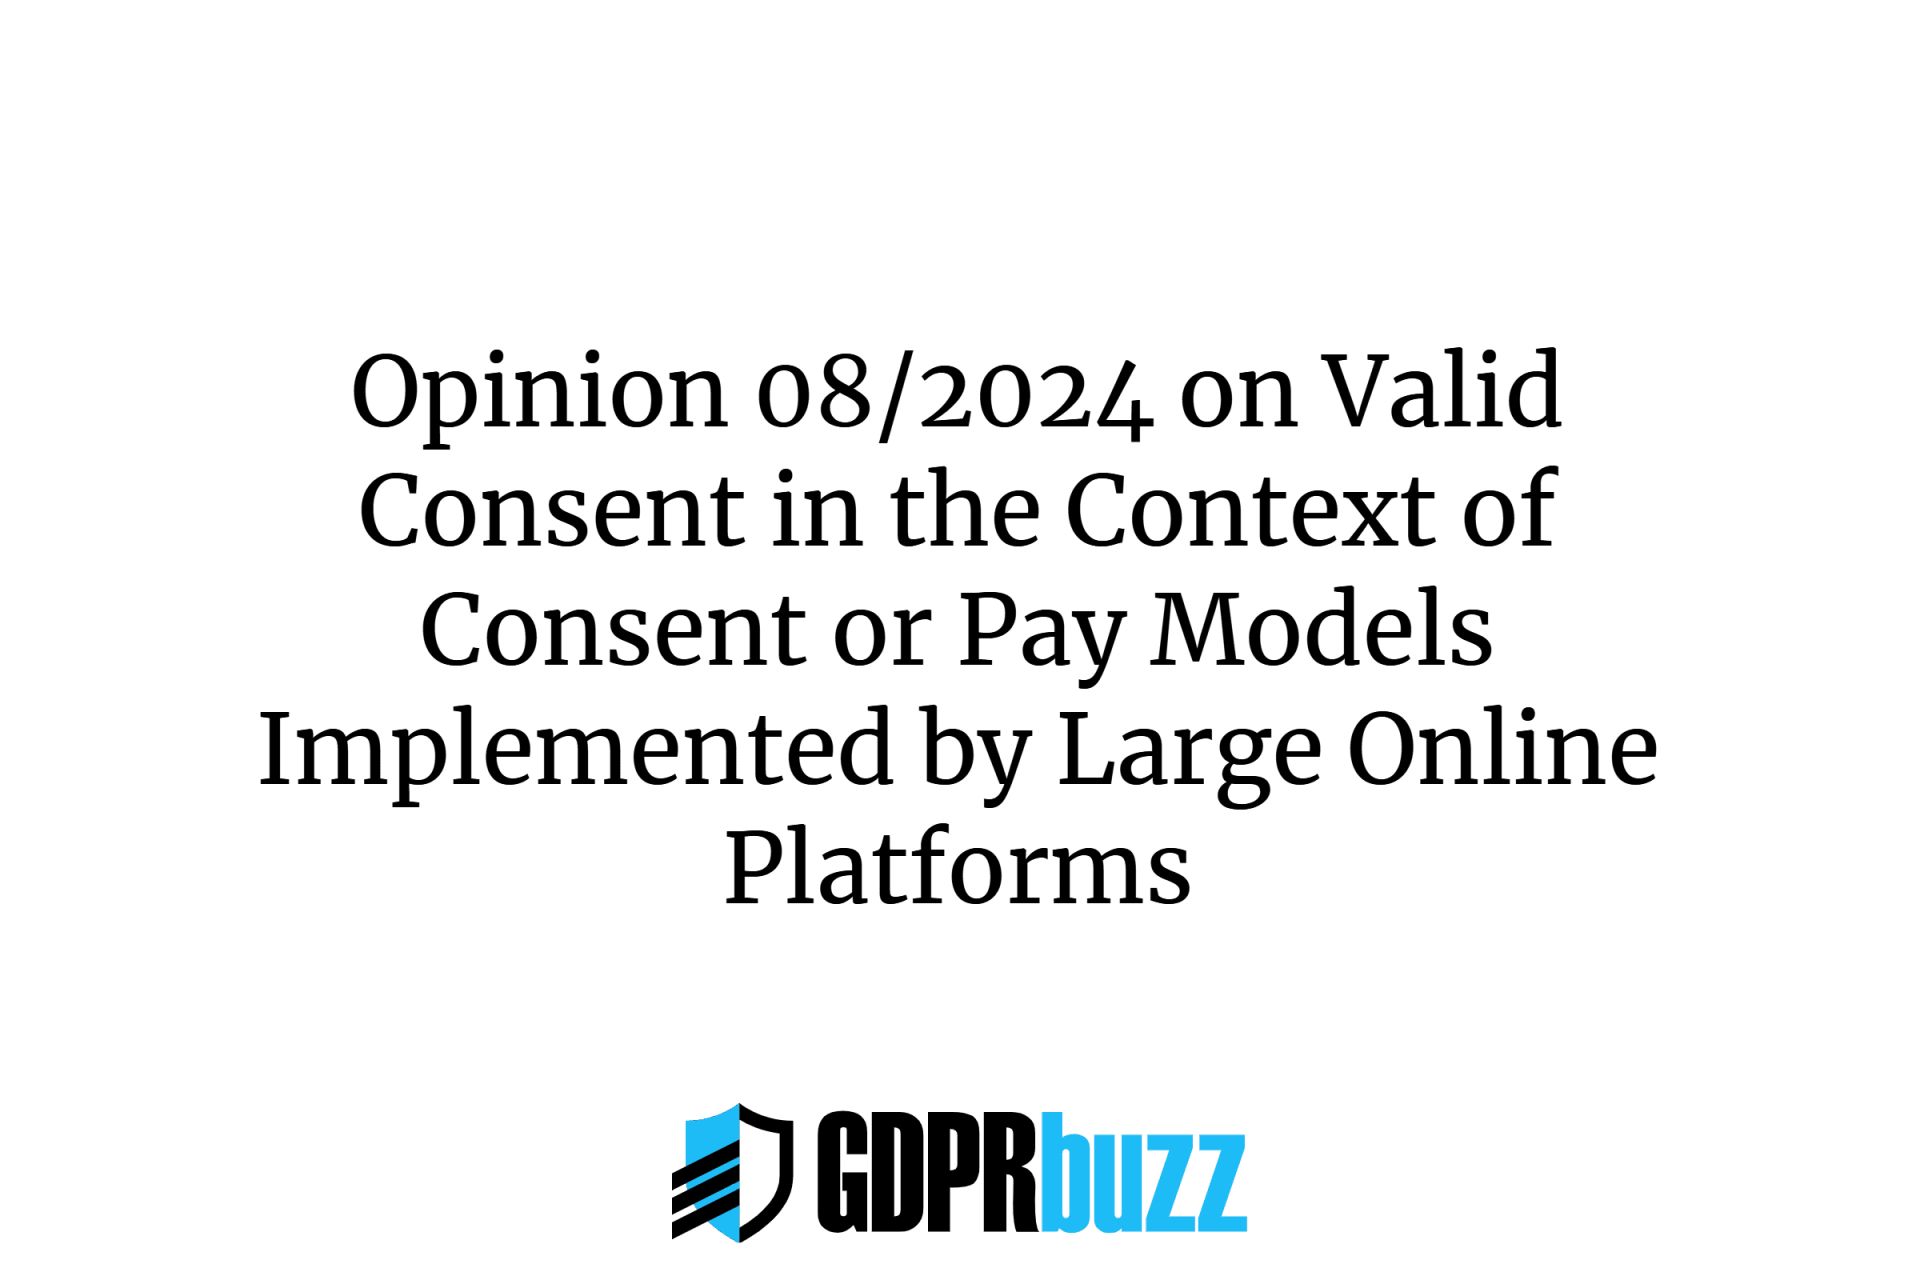 Opinion 08/2024 on valid consent in the context of consent or pay models implemented by large online platforms